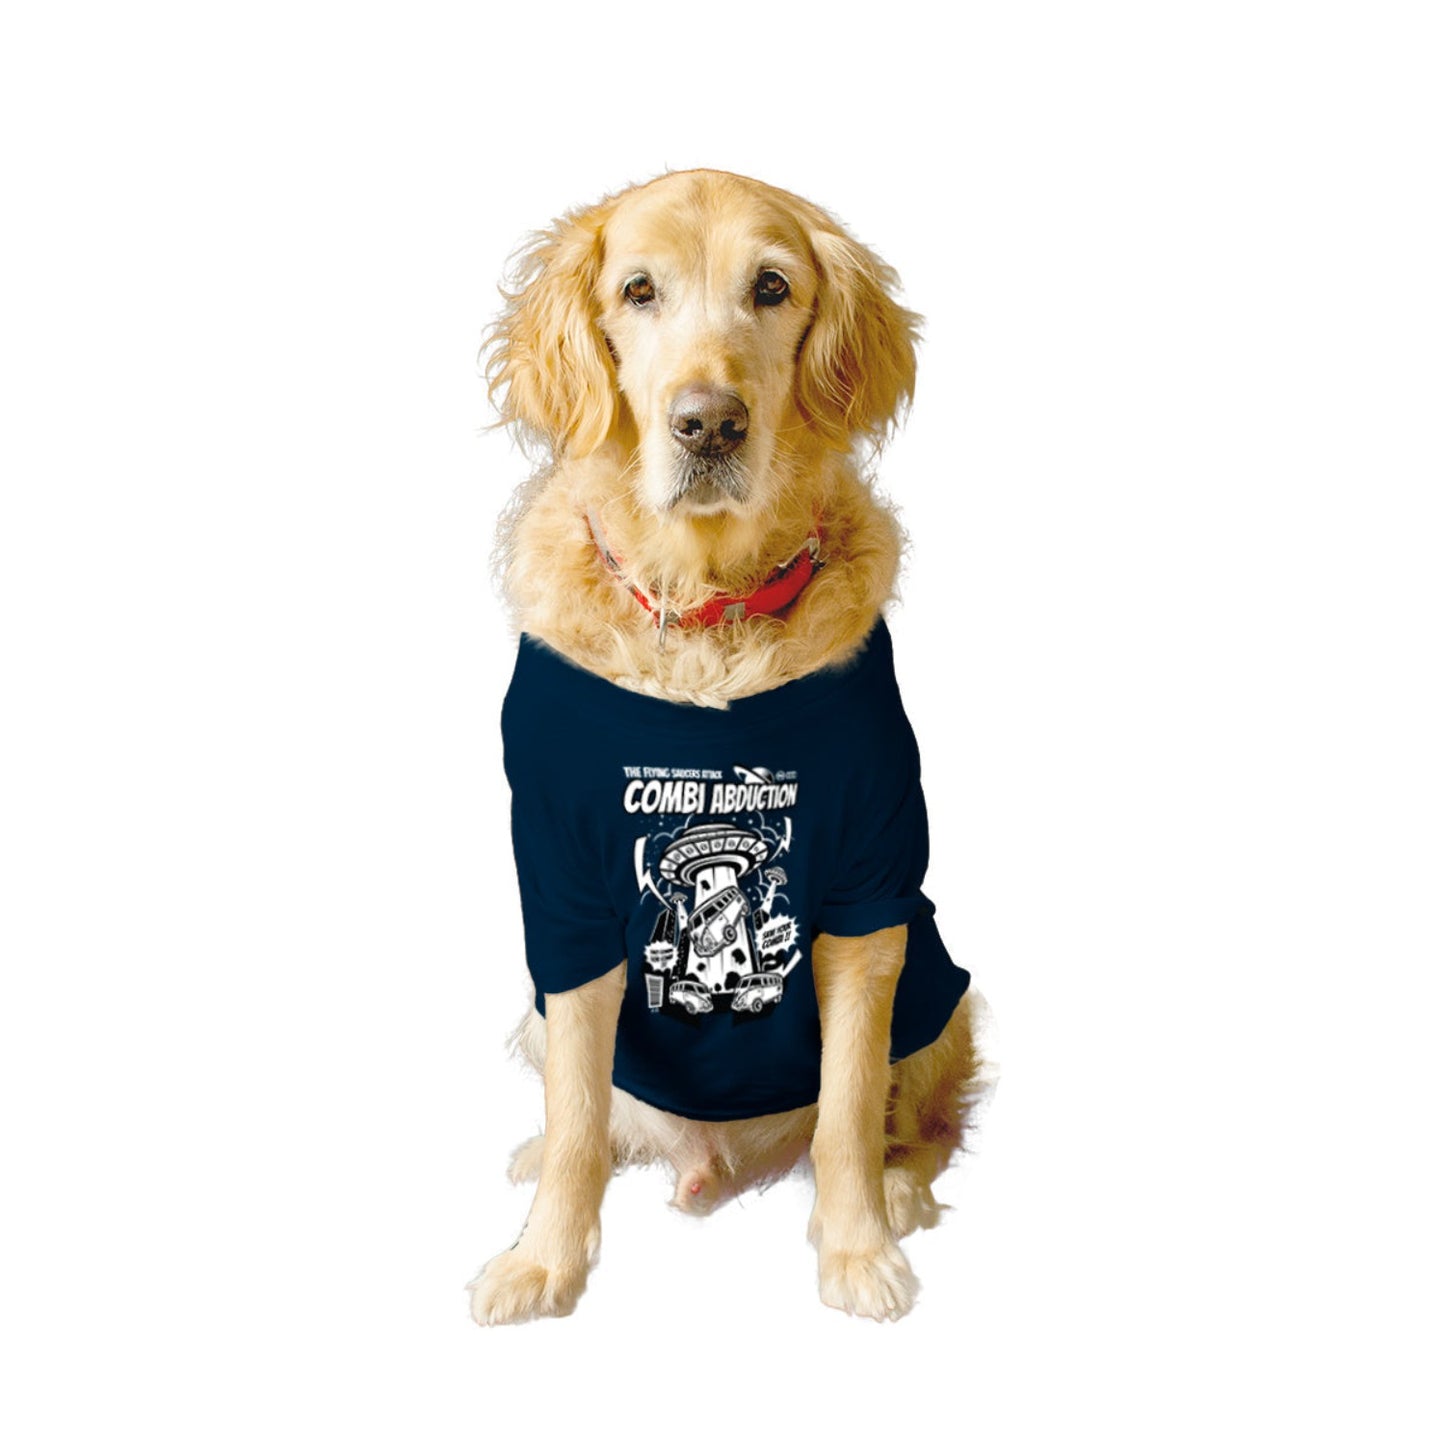 Ruse XX-Small (Chihuahuas, Papillons) / Navy Ruse Basic Crew Neck "COMBI ABDUCTION" Printed Half Sleeves Dog Tee